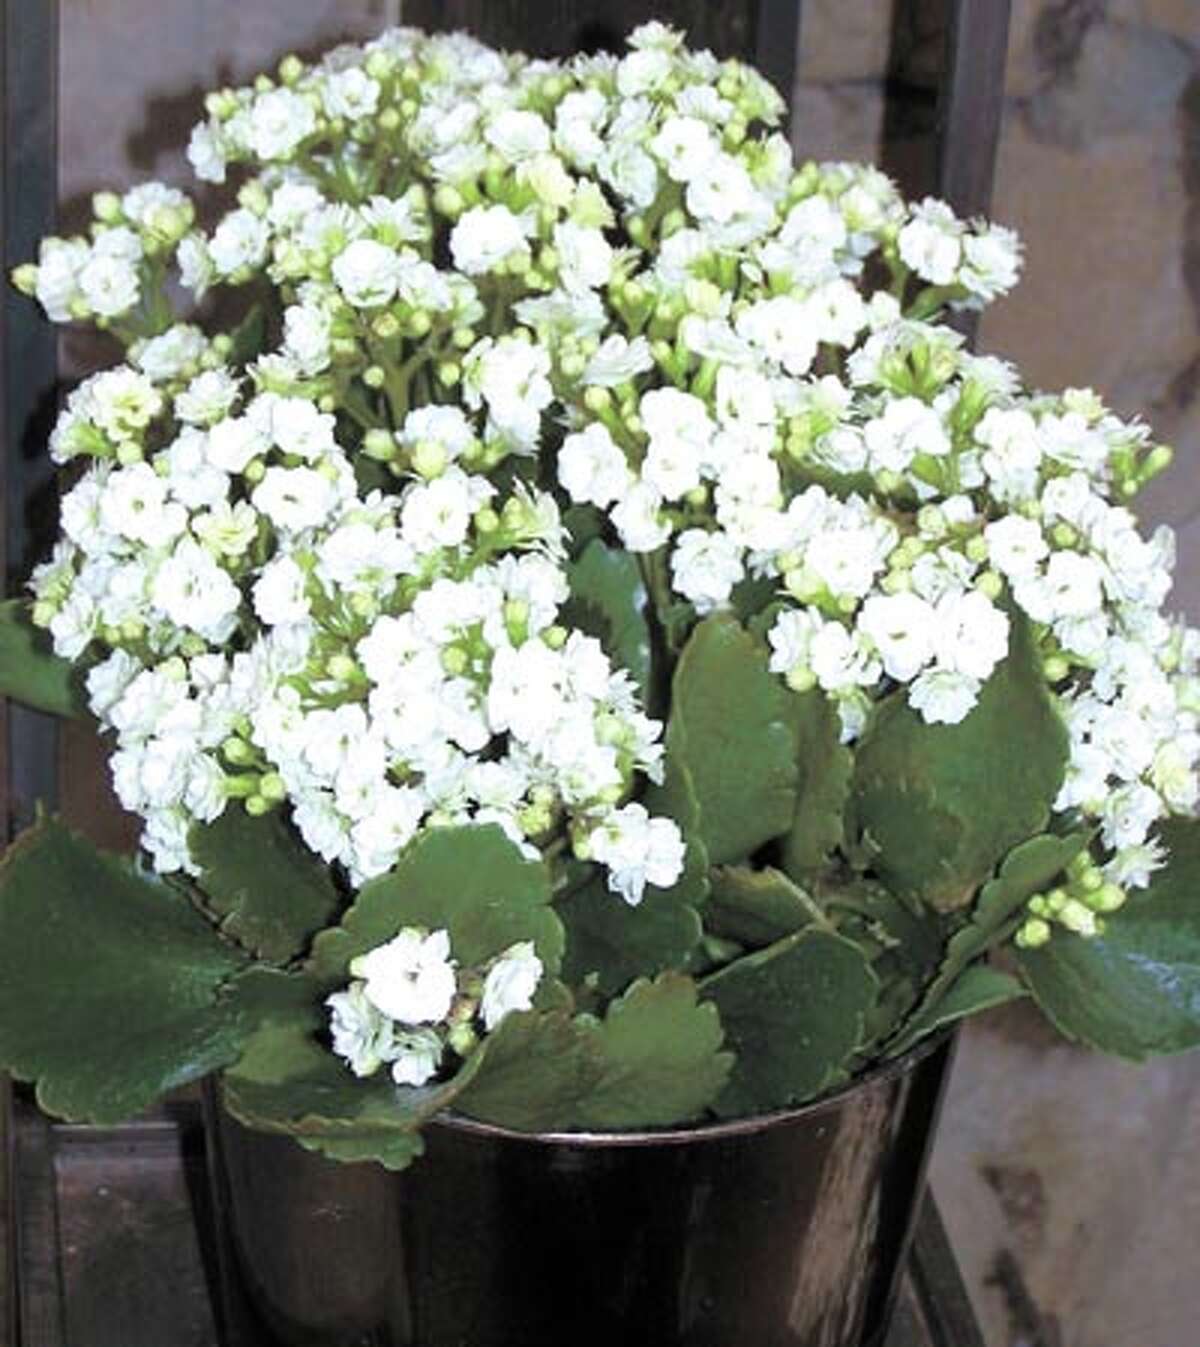 Mom will like you best if you’re the one who sends her beautiful flowers (like these kalanchoes or other flowers) or an amazing plant from the experts of the flower world, Flowerland.